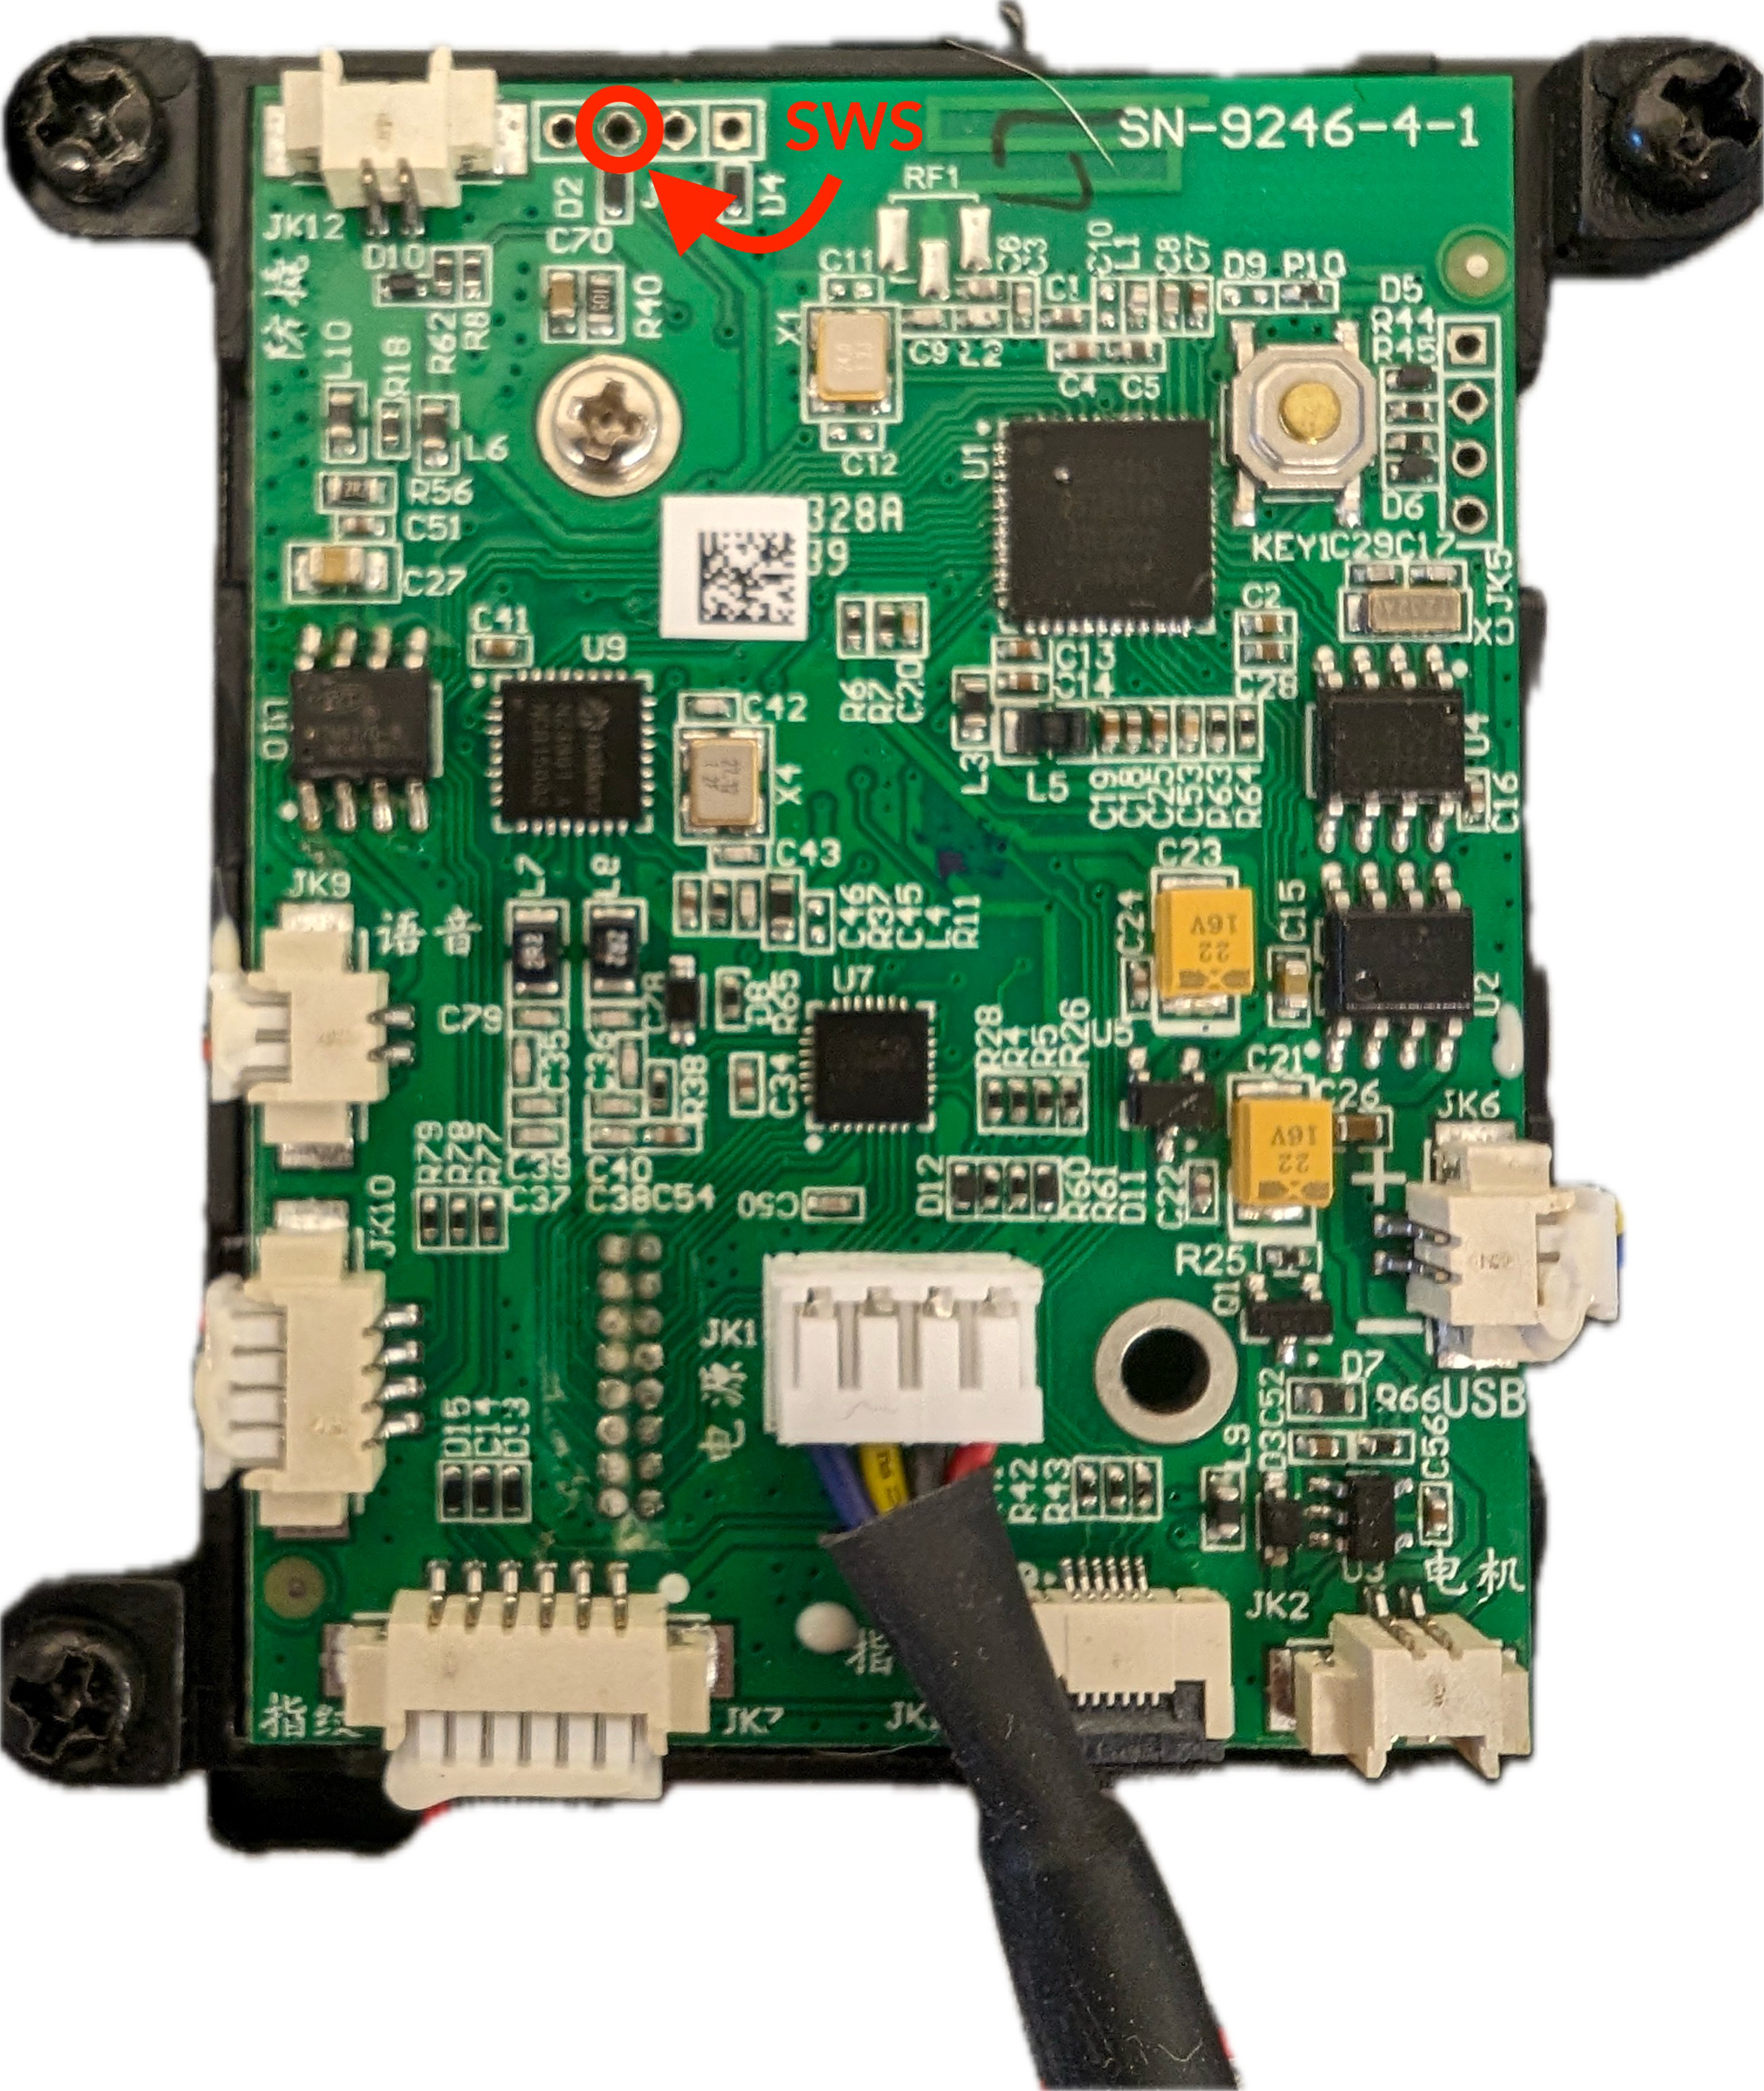 Mainboard of the outside side unit